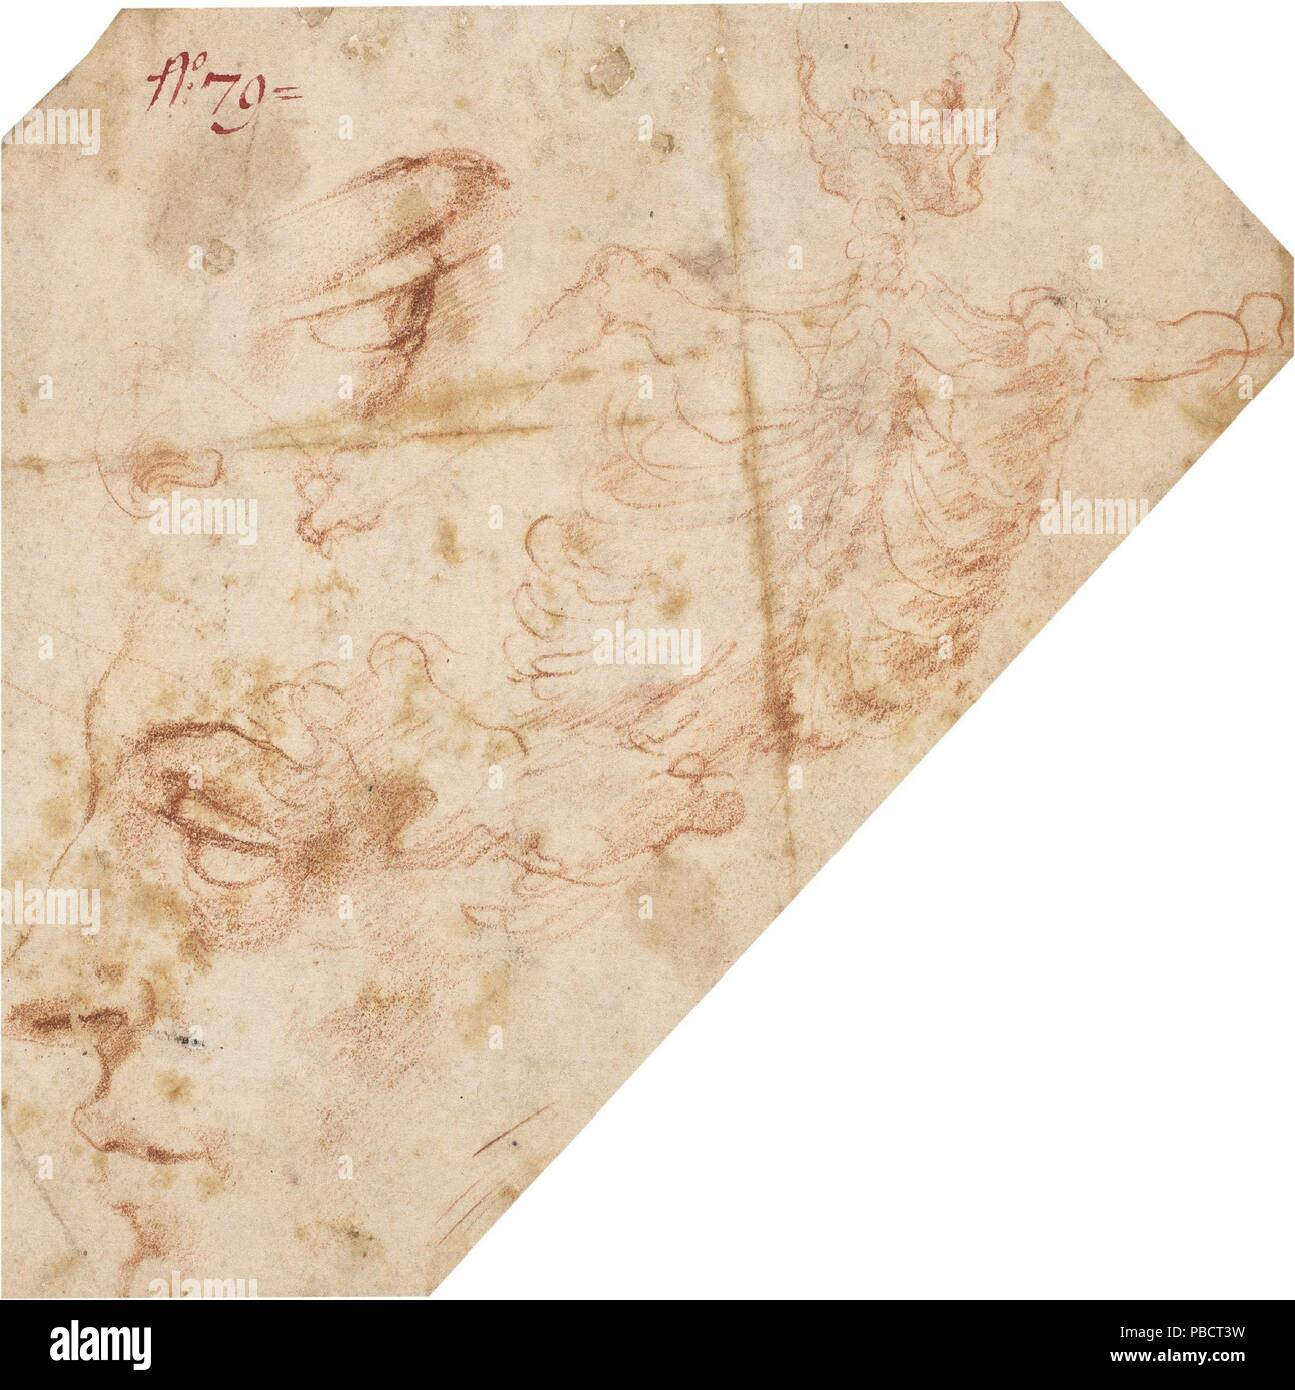 Antonio Mini / 'Studies of a right eye, a face in profile to the left, and a human skeleton'. First half of the XVI century. Red chalk on paper. Museum: Museo del Prado, Madrid, España. Stock Photo